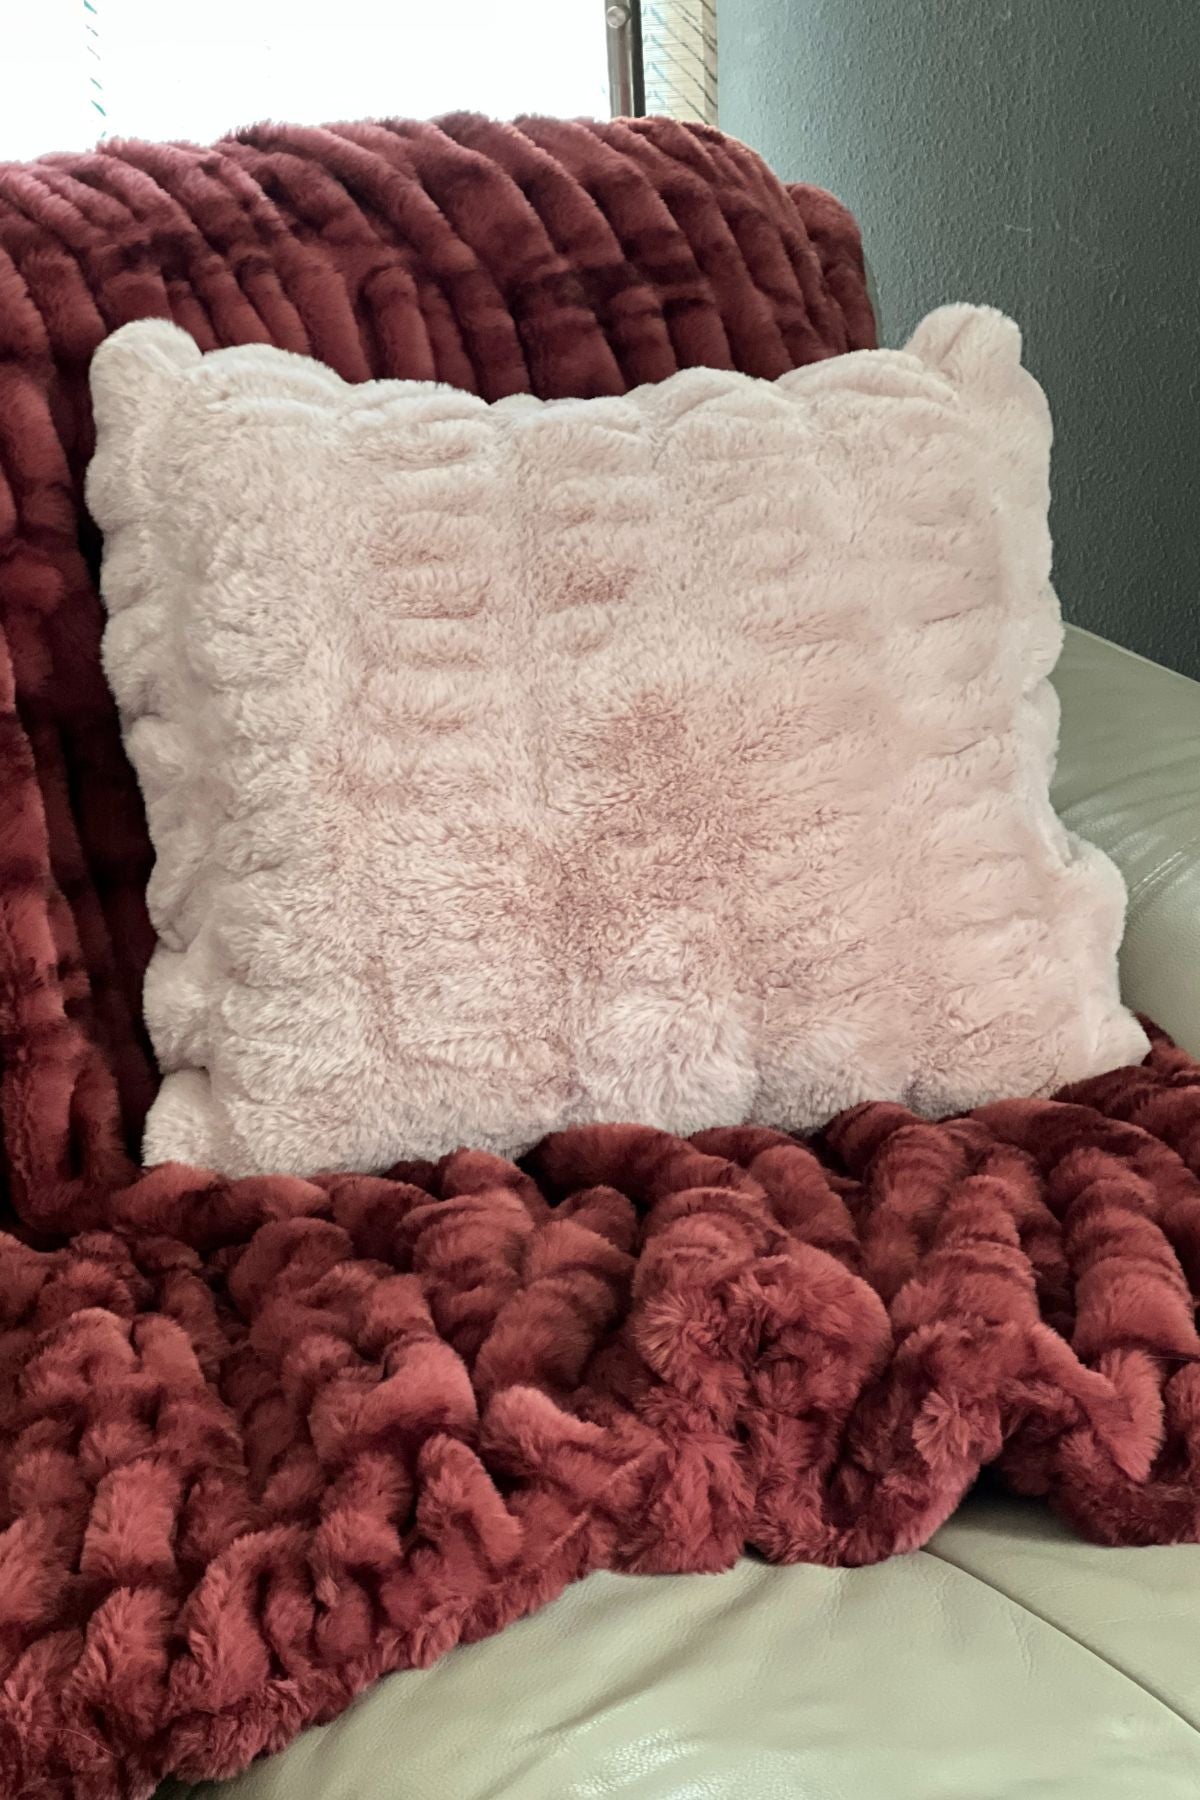 Pillow Sham - Royal Opulence in Rosé on a Maple Glow  Faux Fur Throw. Made in Seattle Washington